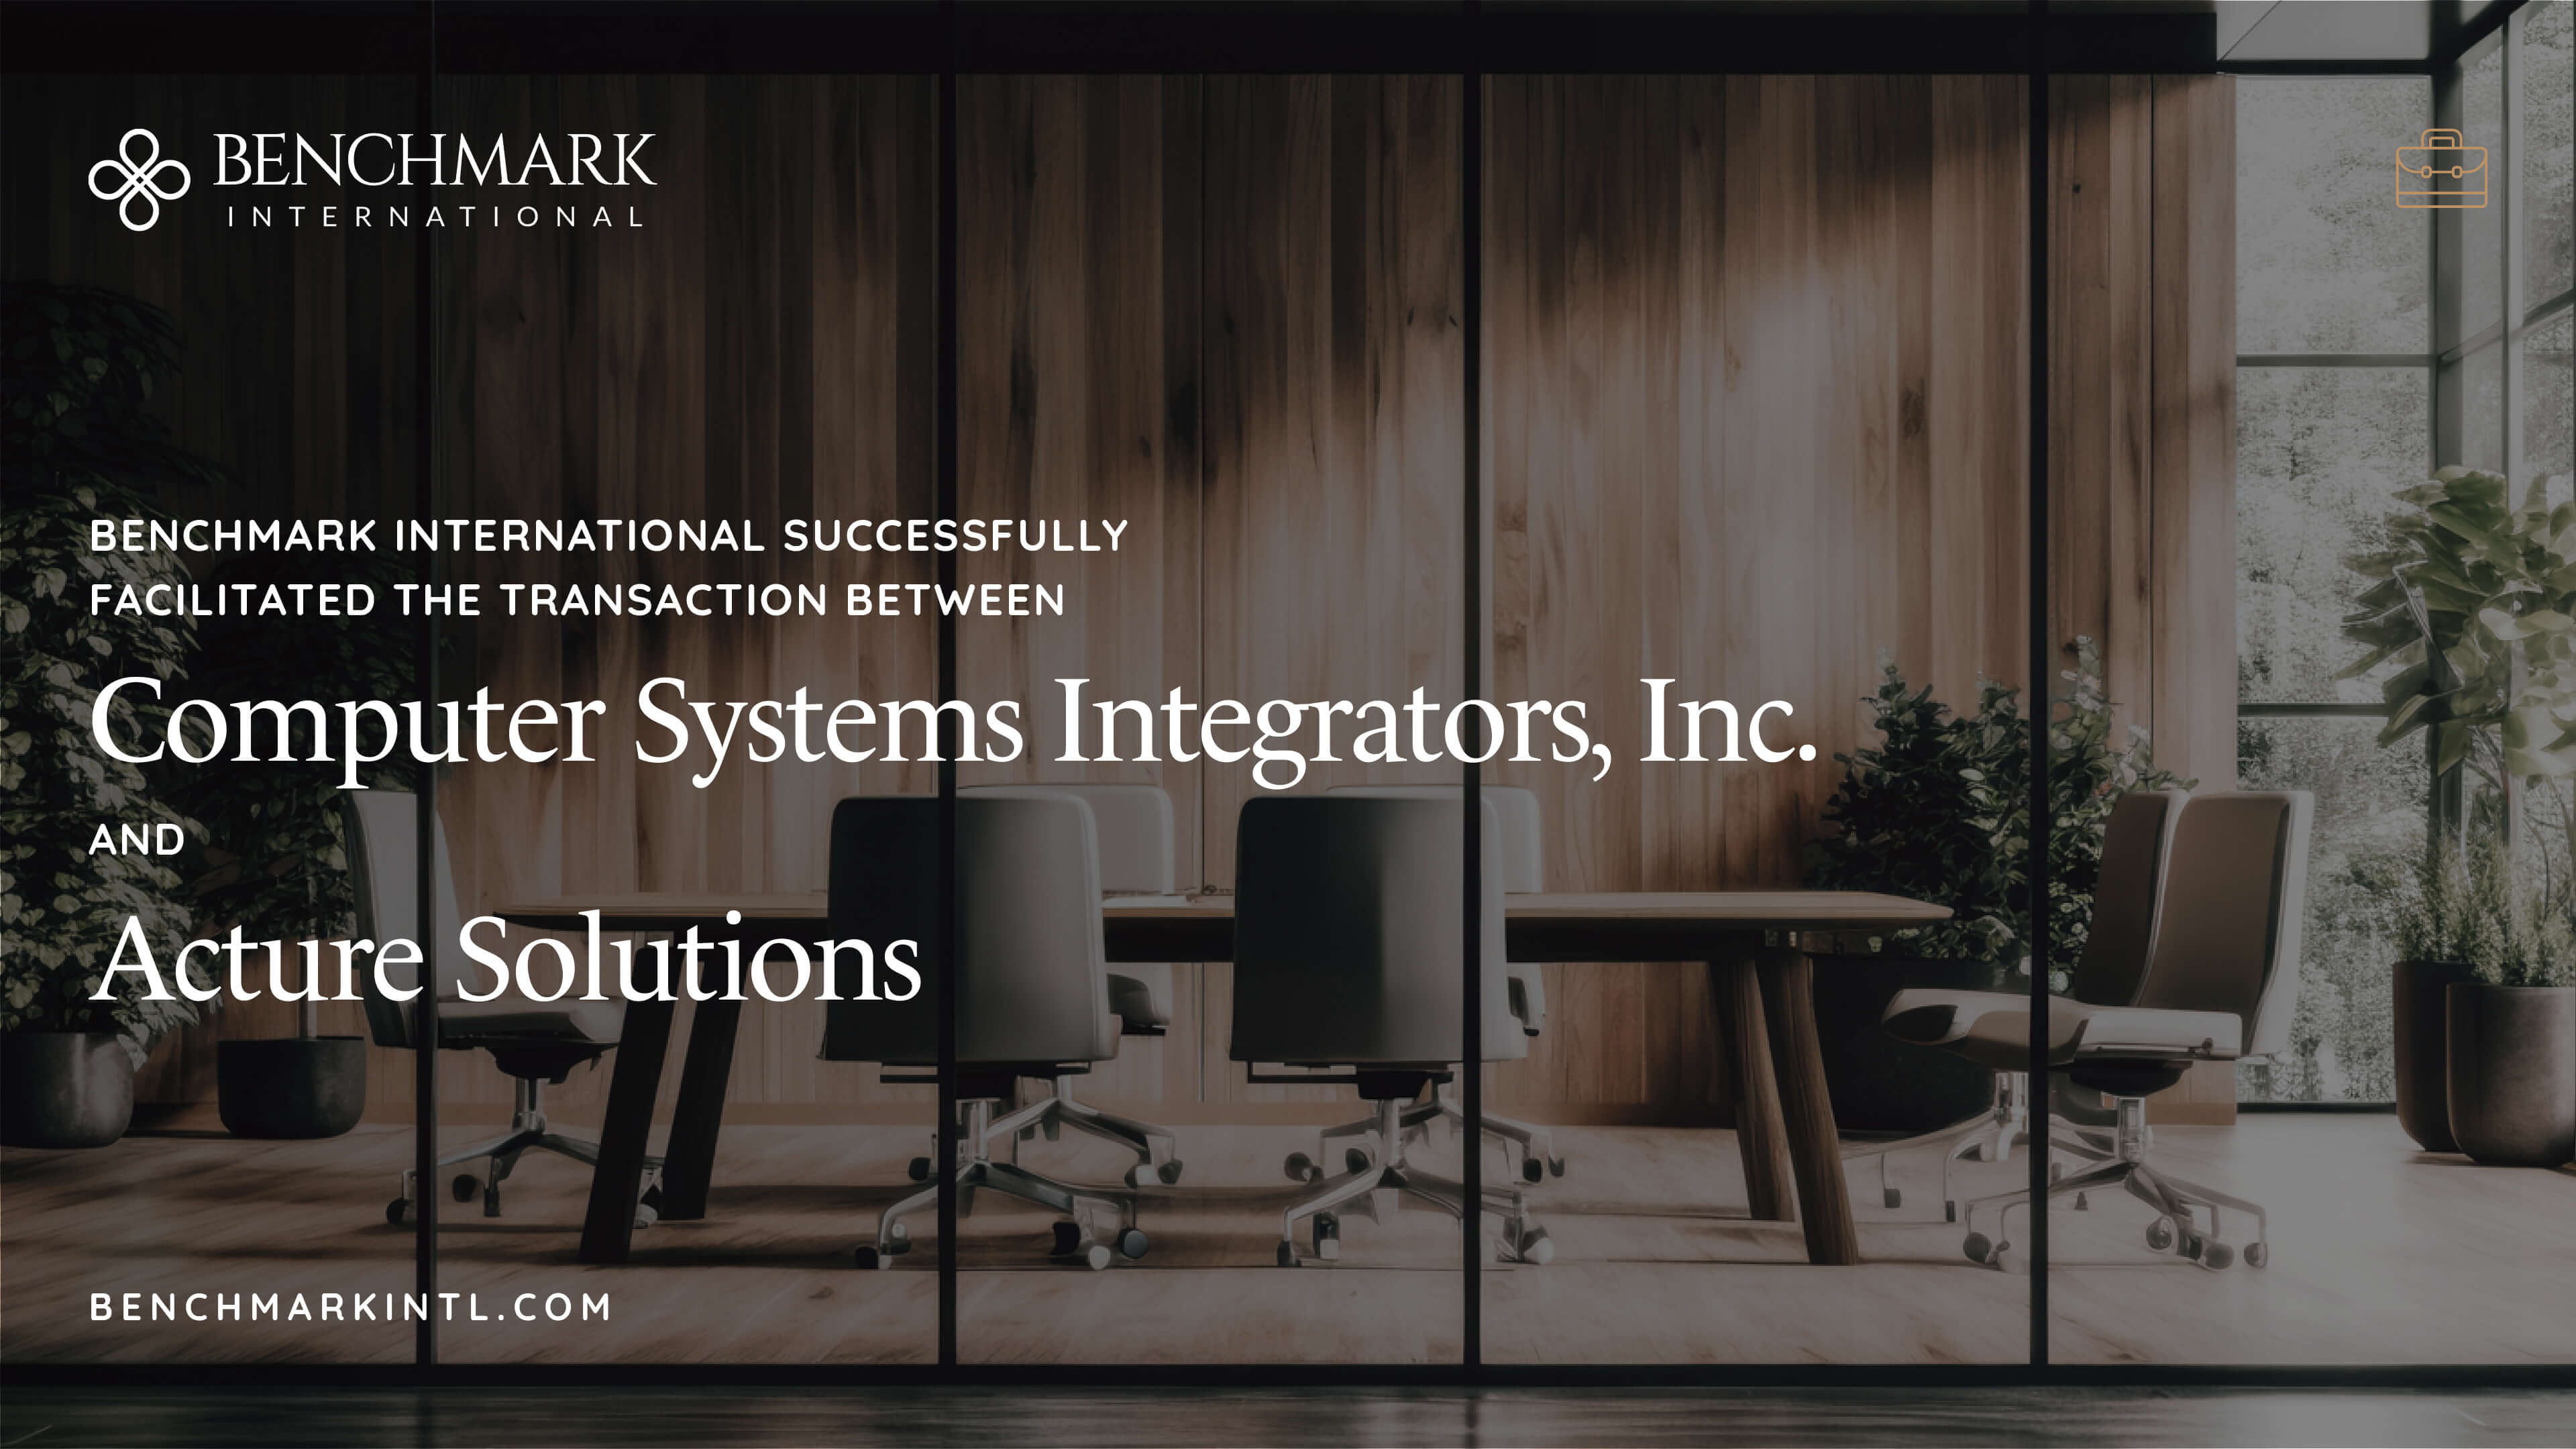 Benchmark International Successfully Facilitated the Transaction Between Computer Systems Integrators, Inc. and Acture Solutions